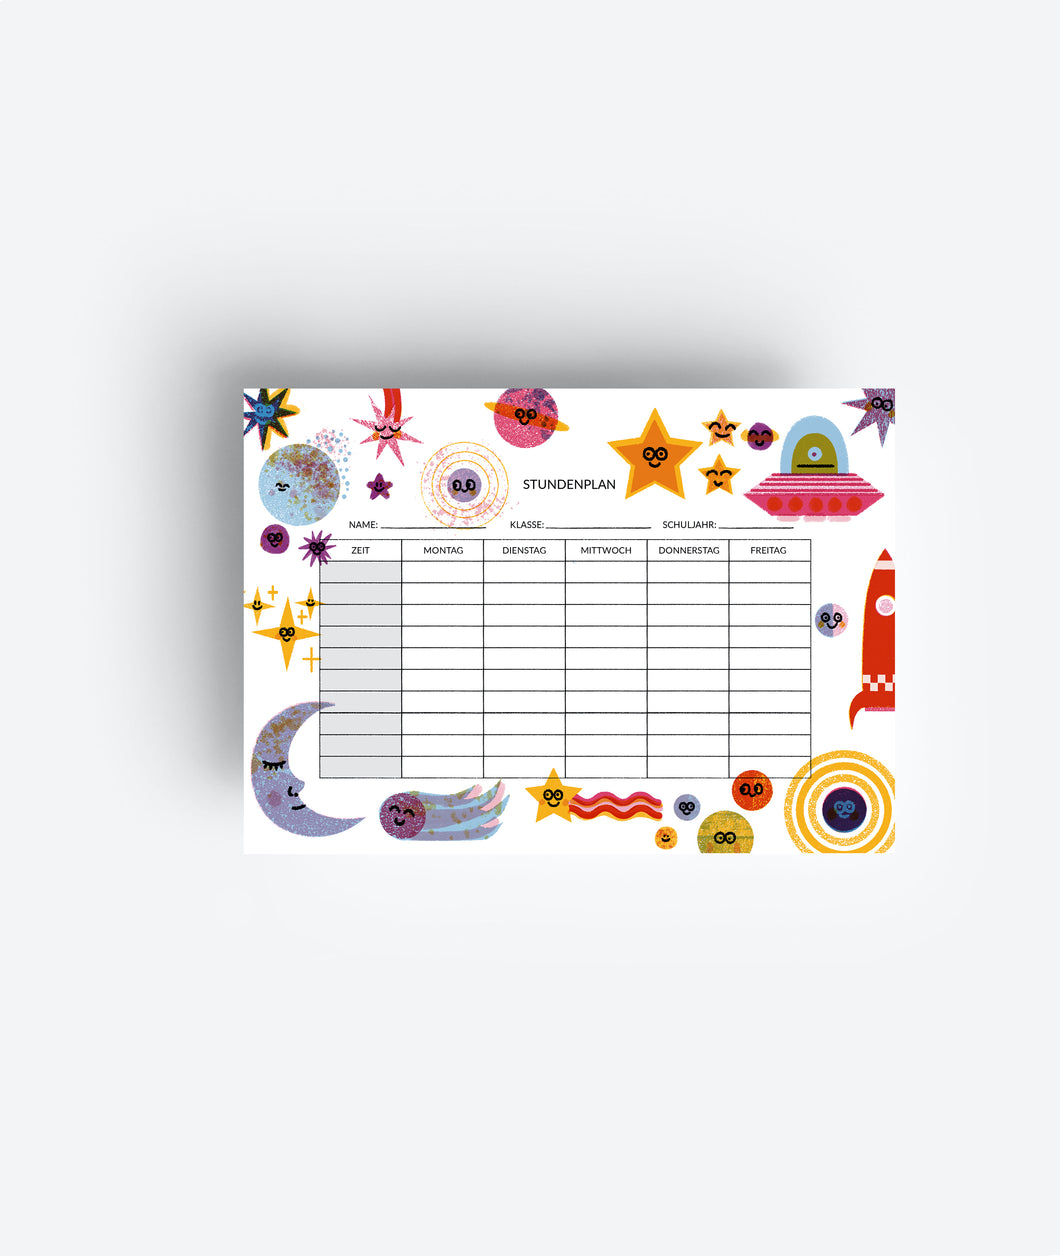 modern and cute timetable showing space related characters and planets jungwiealt